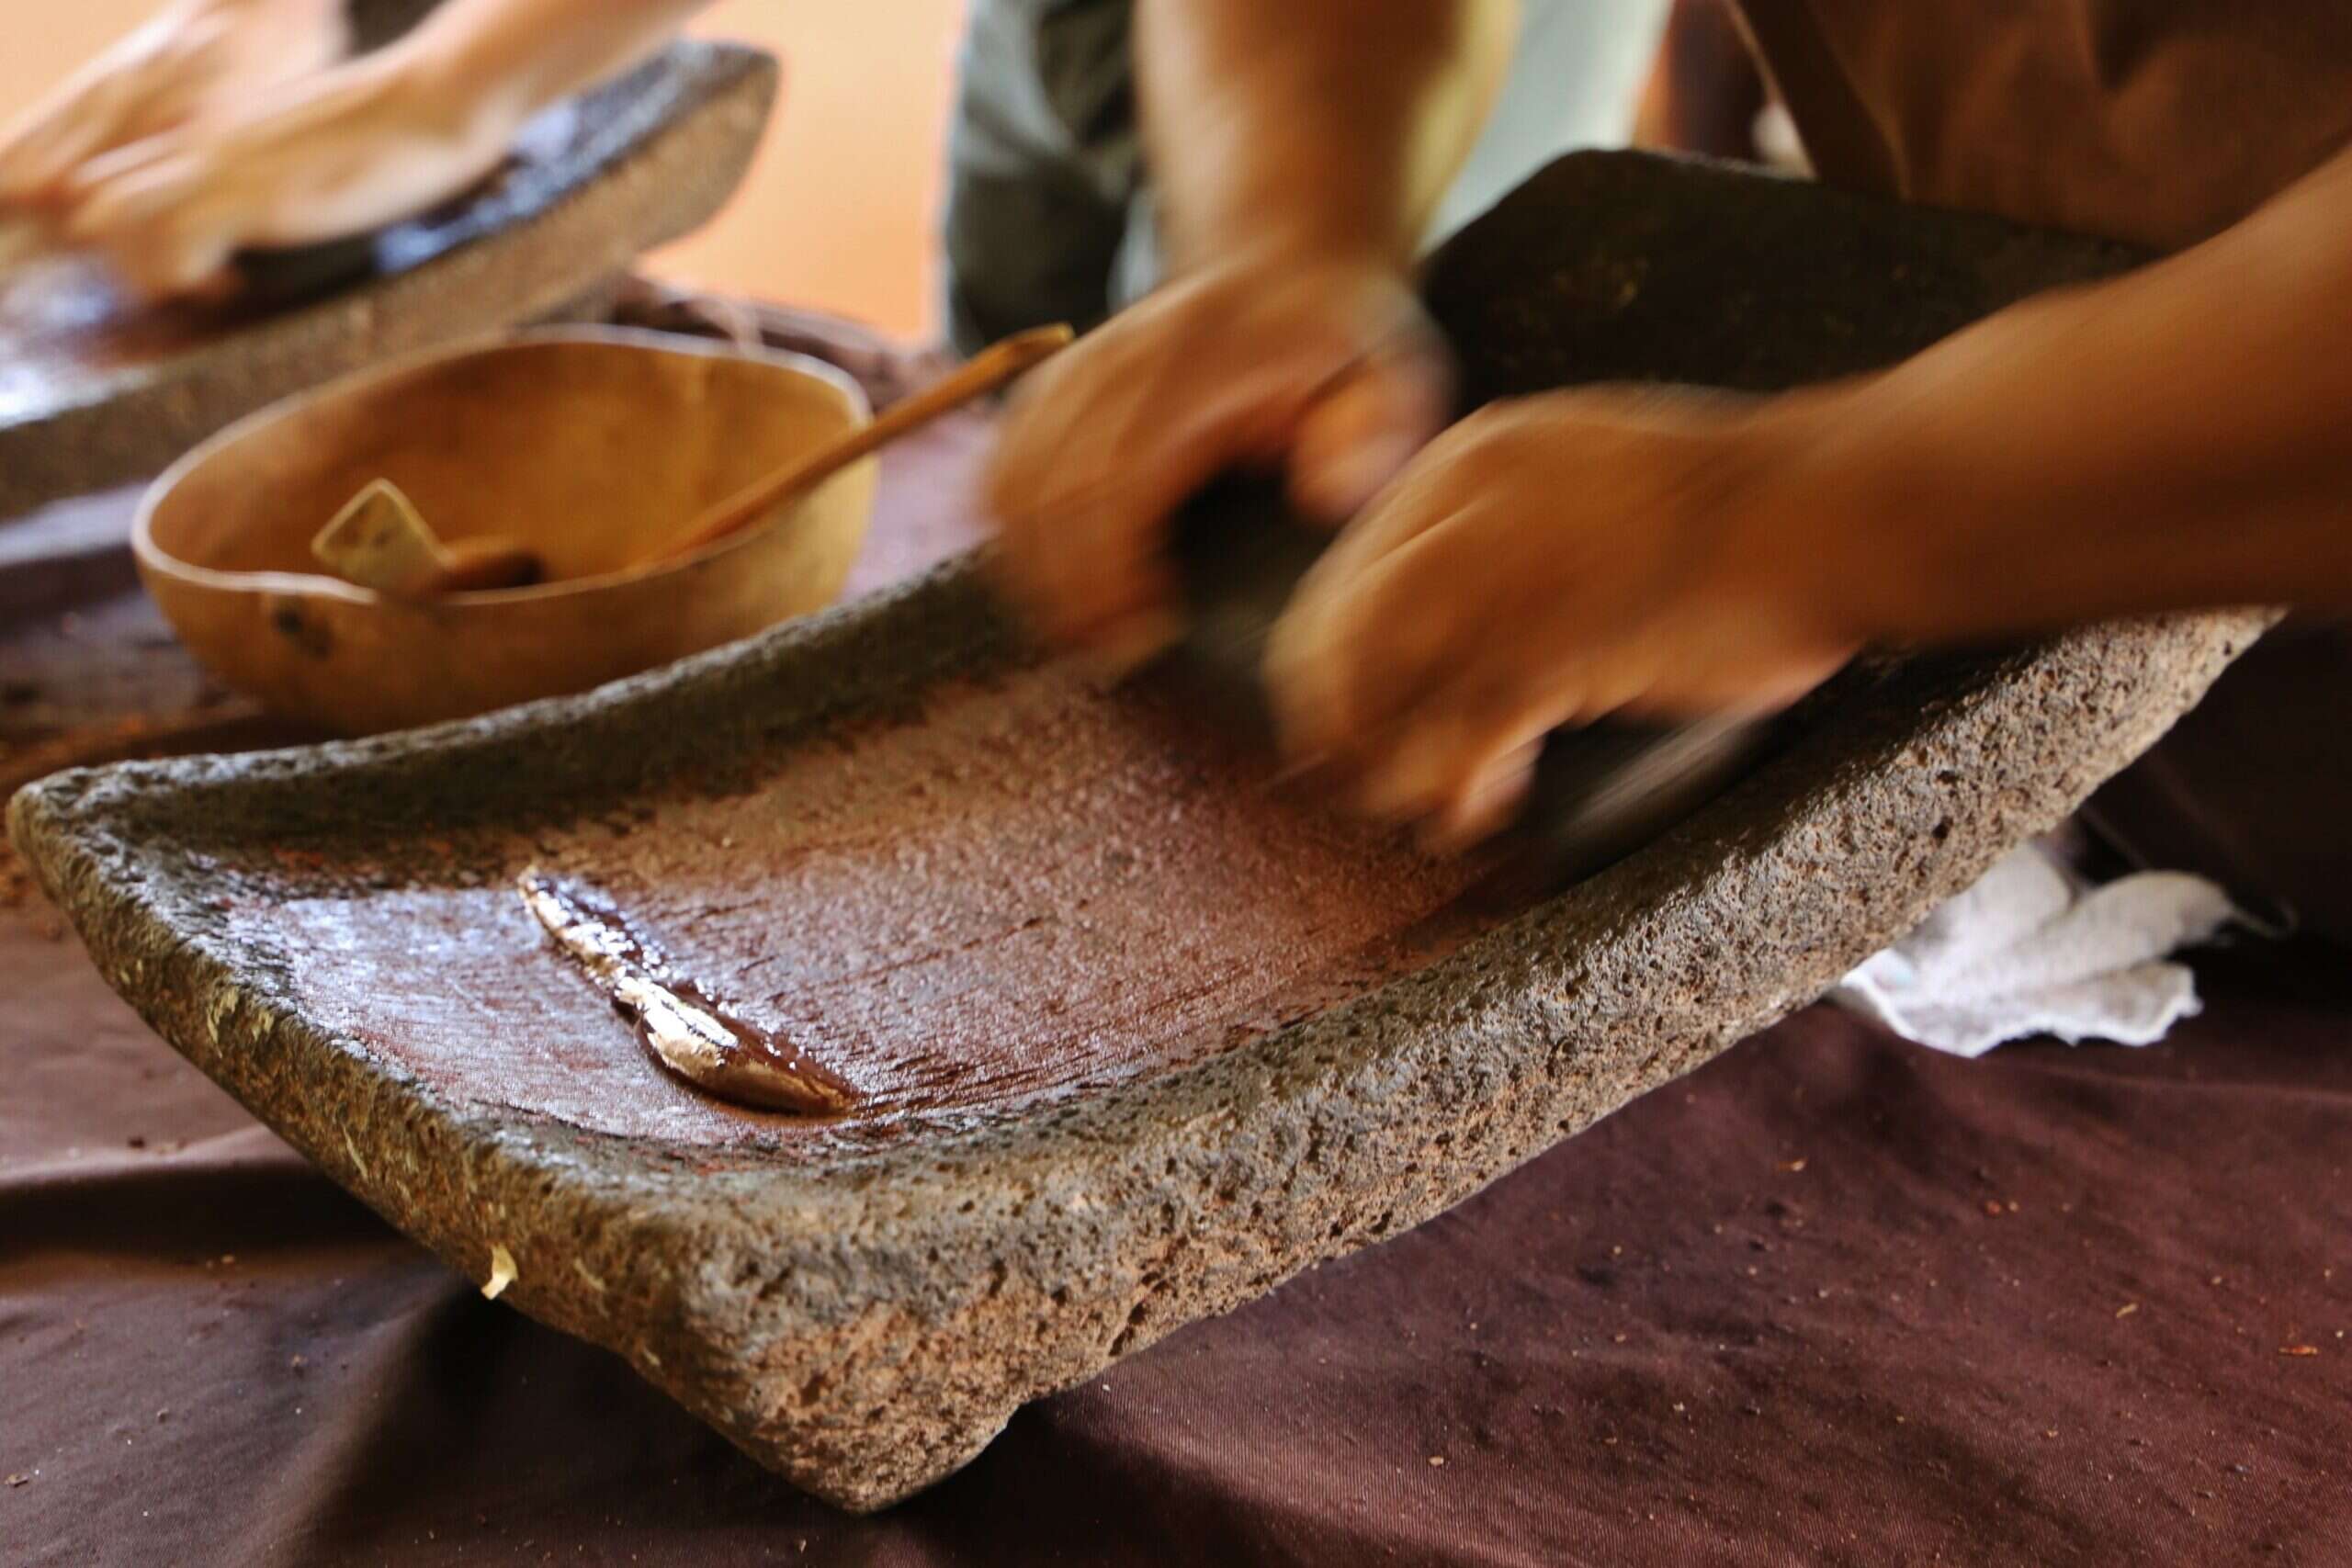 Chocolate making in belize